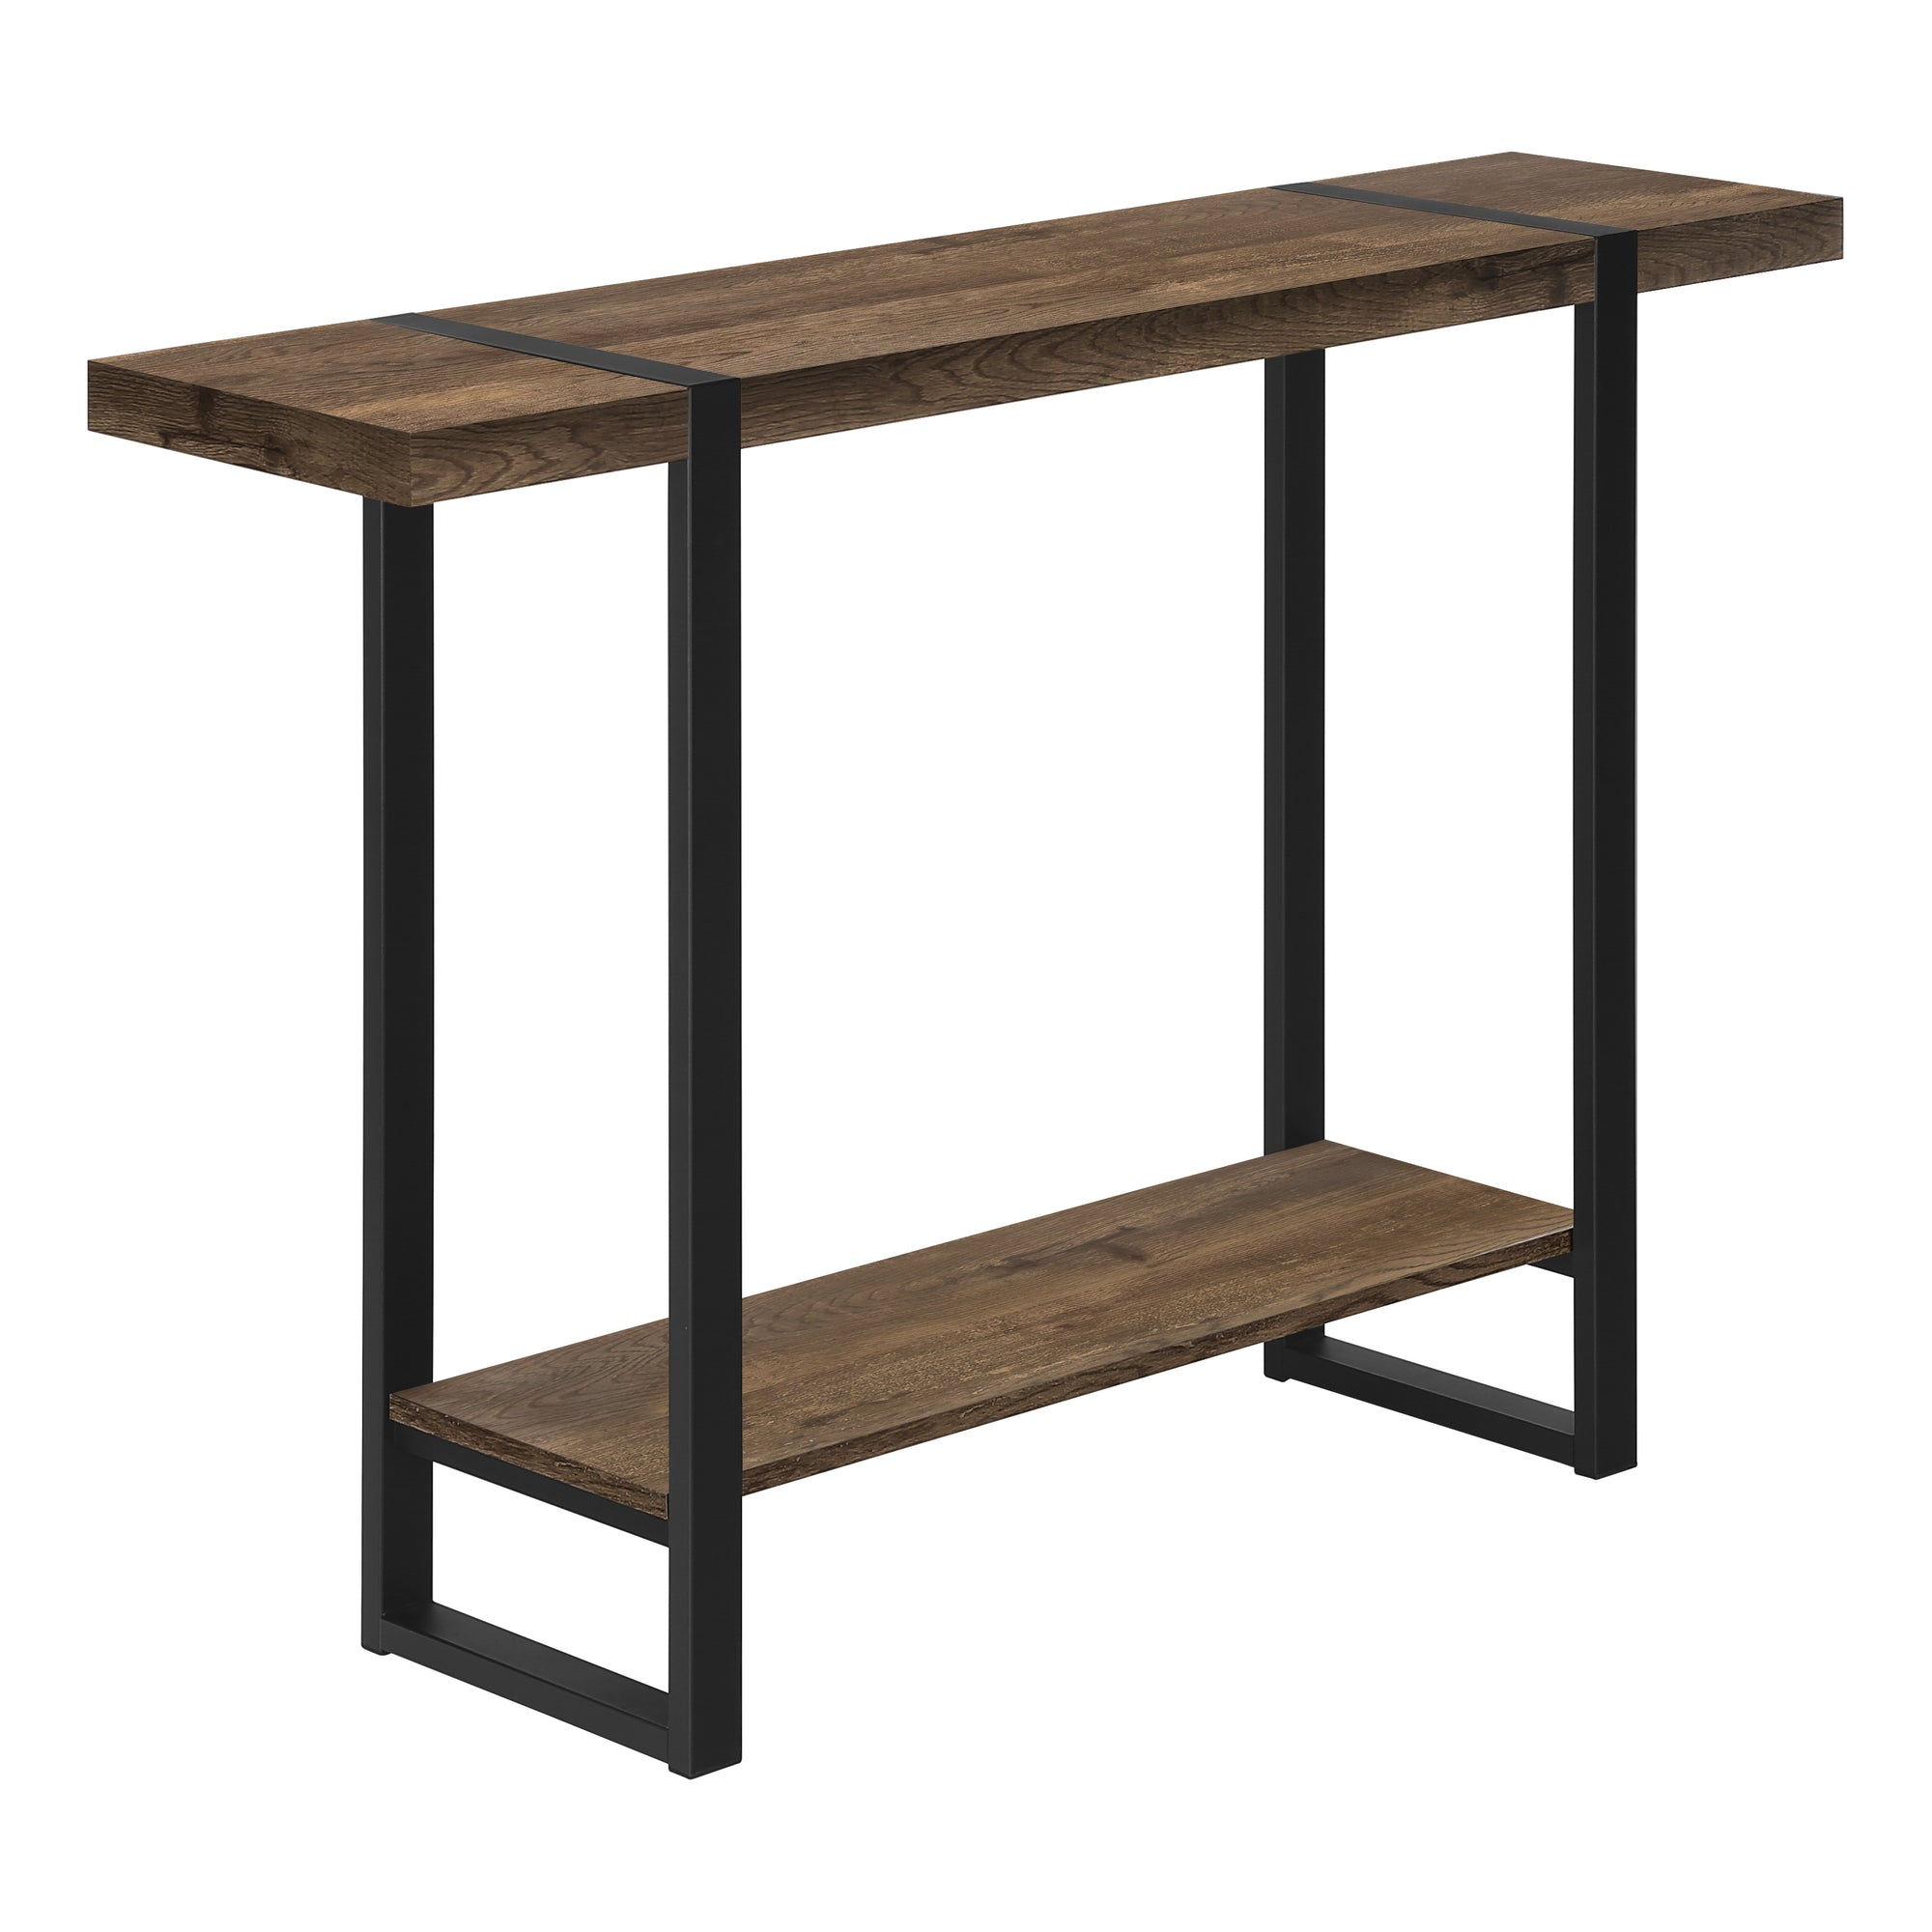 ACCENT TABLE - 48"L / BROWN RECLAIMED WOOD-LOOK / BLACK